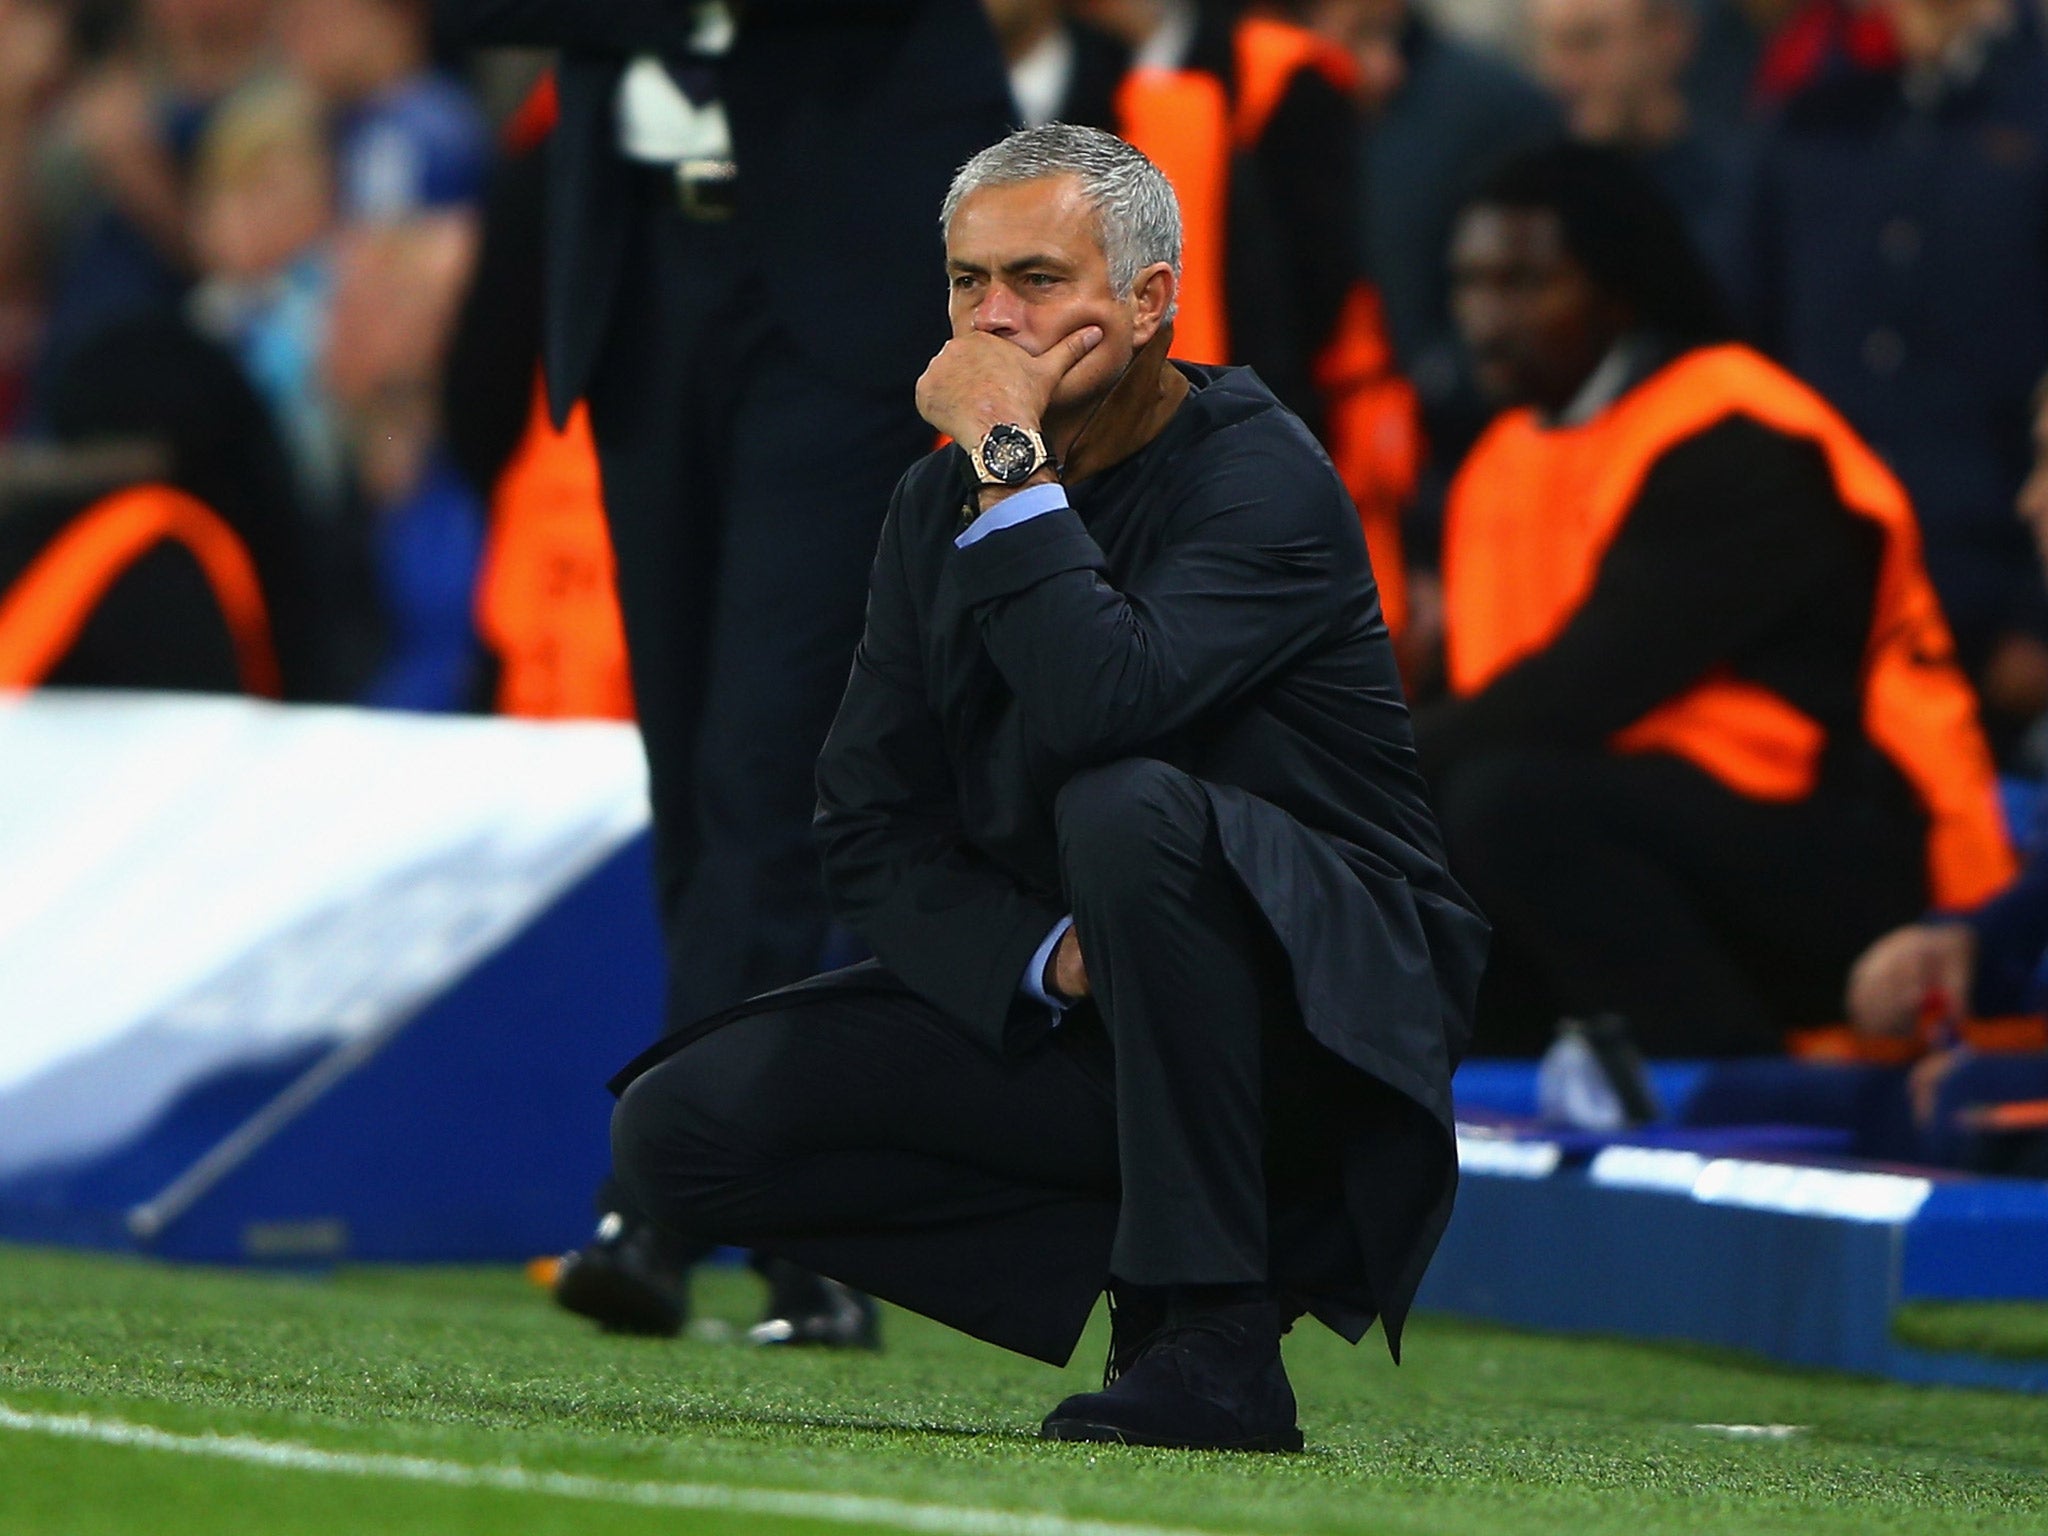 Jose Mourinho is in desperate need of a win